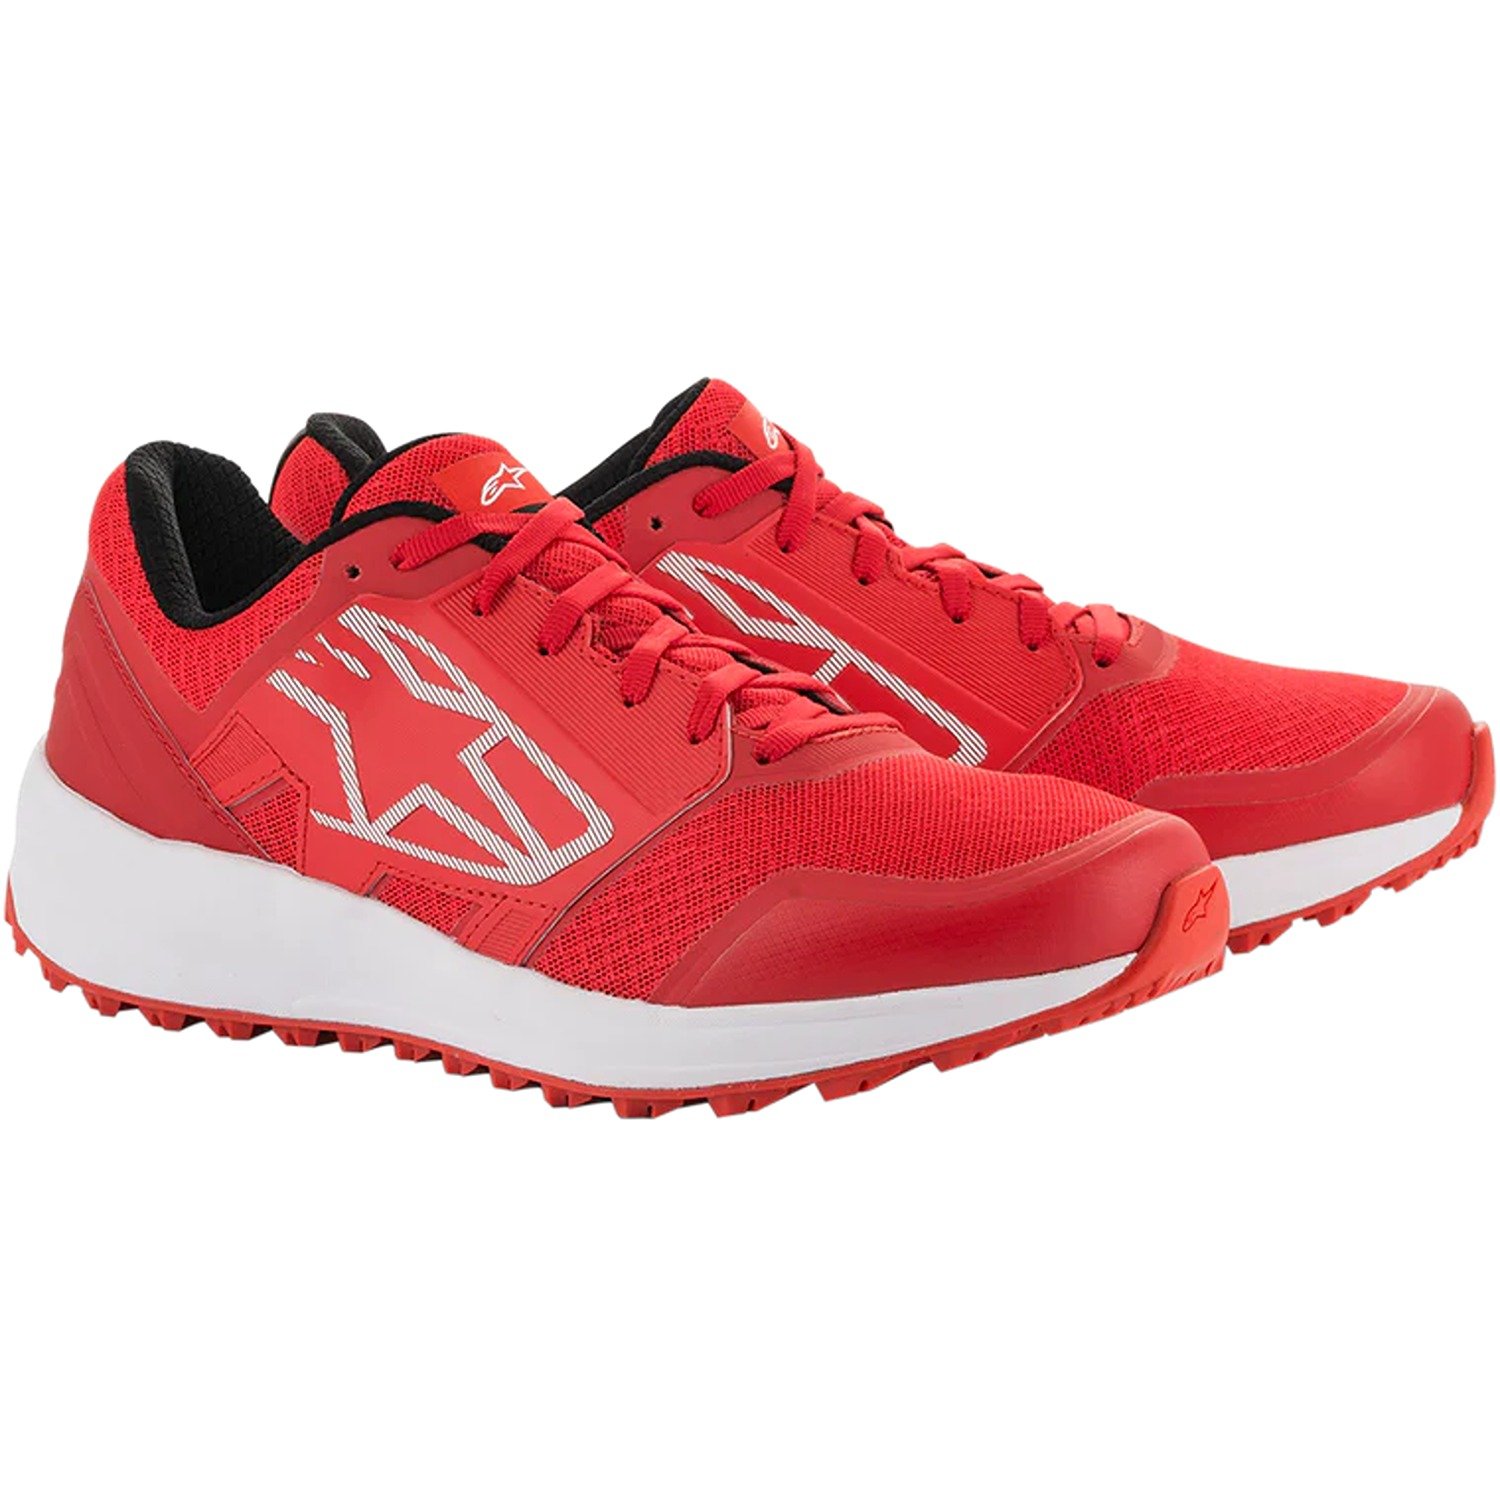 Image of EU Alpinestars Meta Trail Shoes Red White Taille US 7